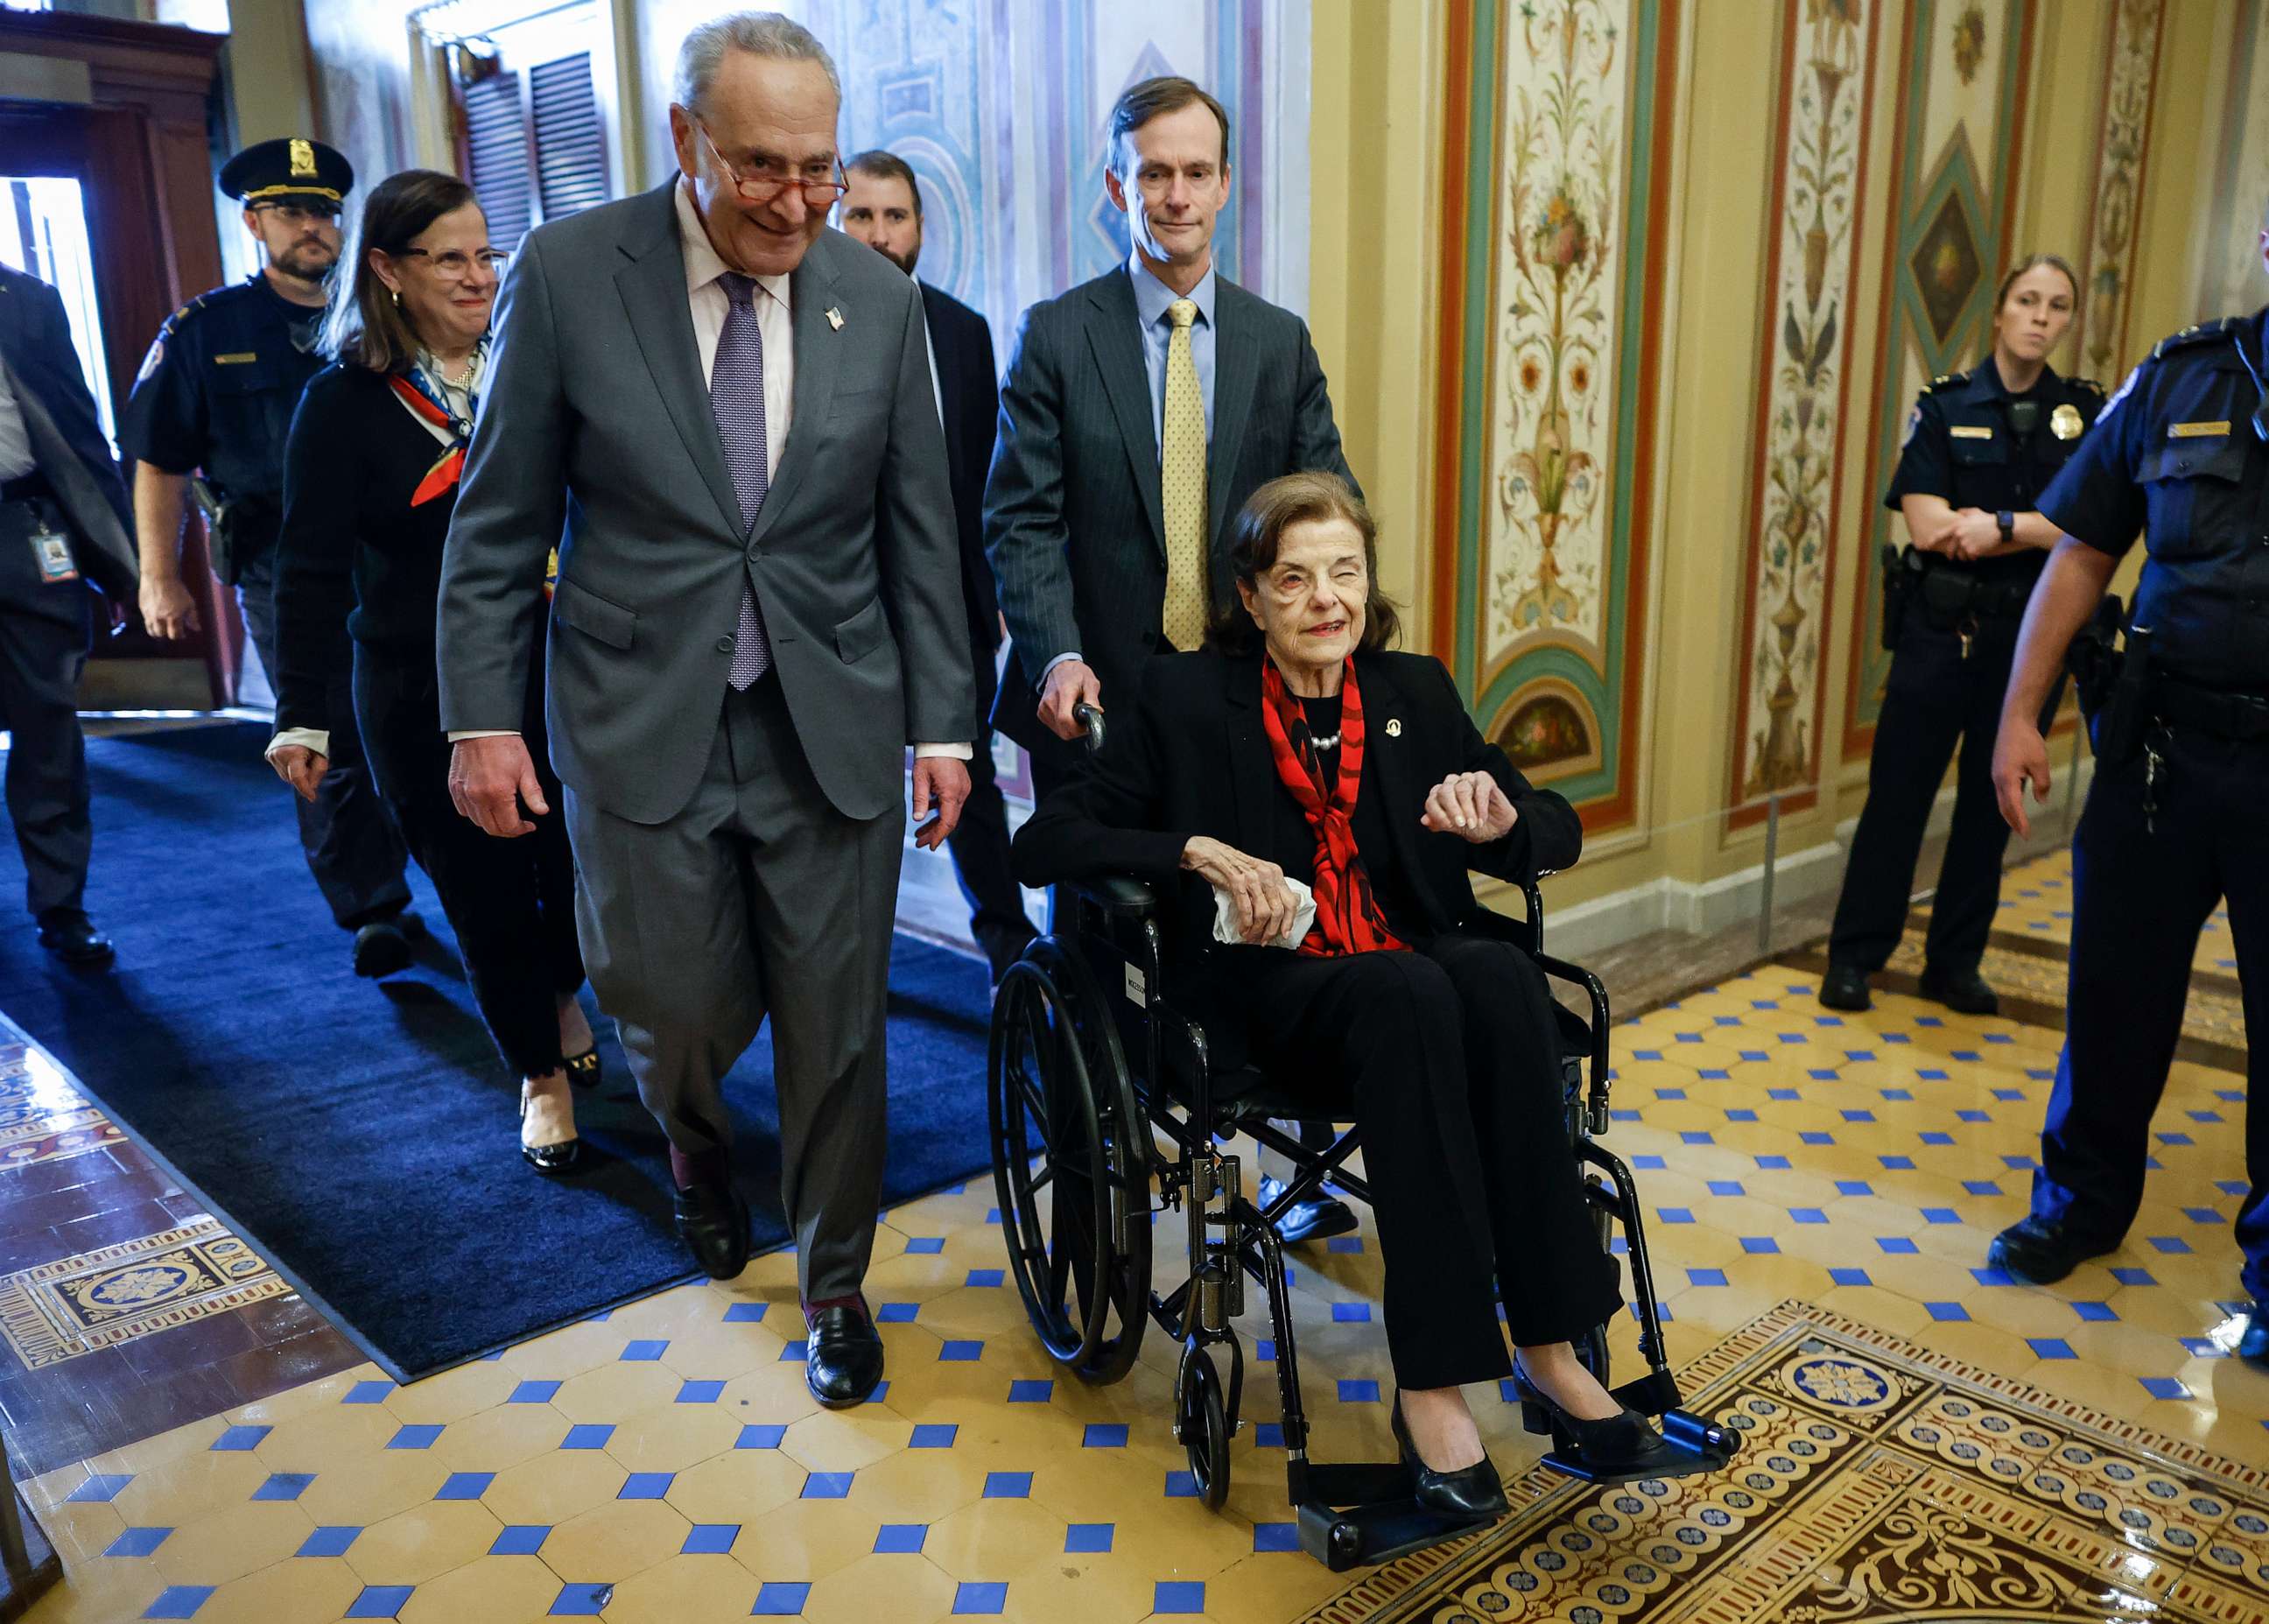 PHOTO: Senate Majority Leader Charles Schumer escorts Sen. Dianne Feinstein as she arrives at the U.S. Capitol following a long absence due to health issues May 10, 2023, in Washington.